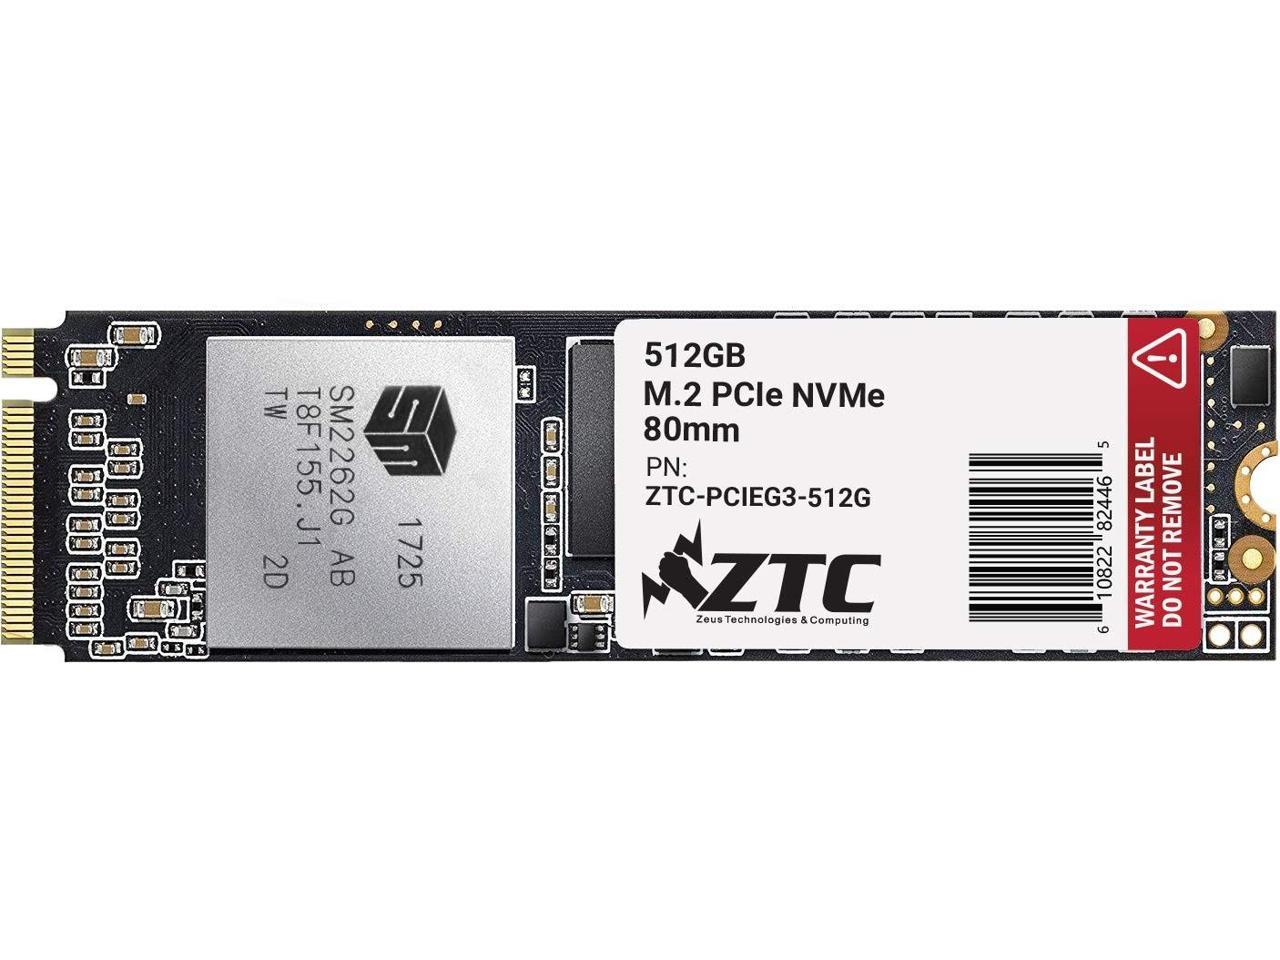 ZTC M.2 NVMe PCIe 80mm SSD Astounding Performance and High-Endurance Great Upgrade for Gaming (512GB, 512GB)